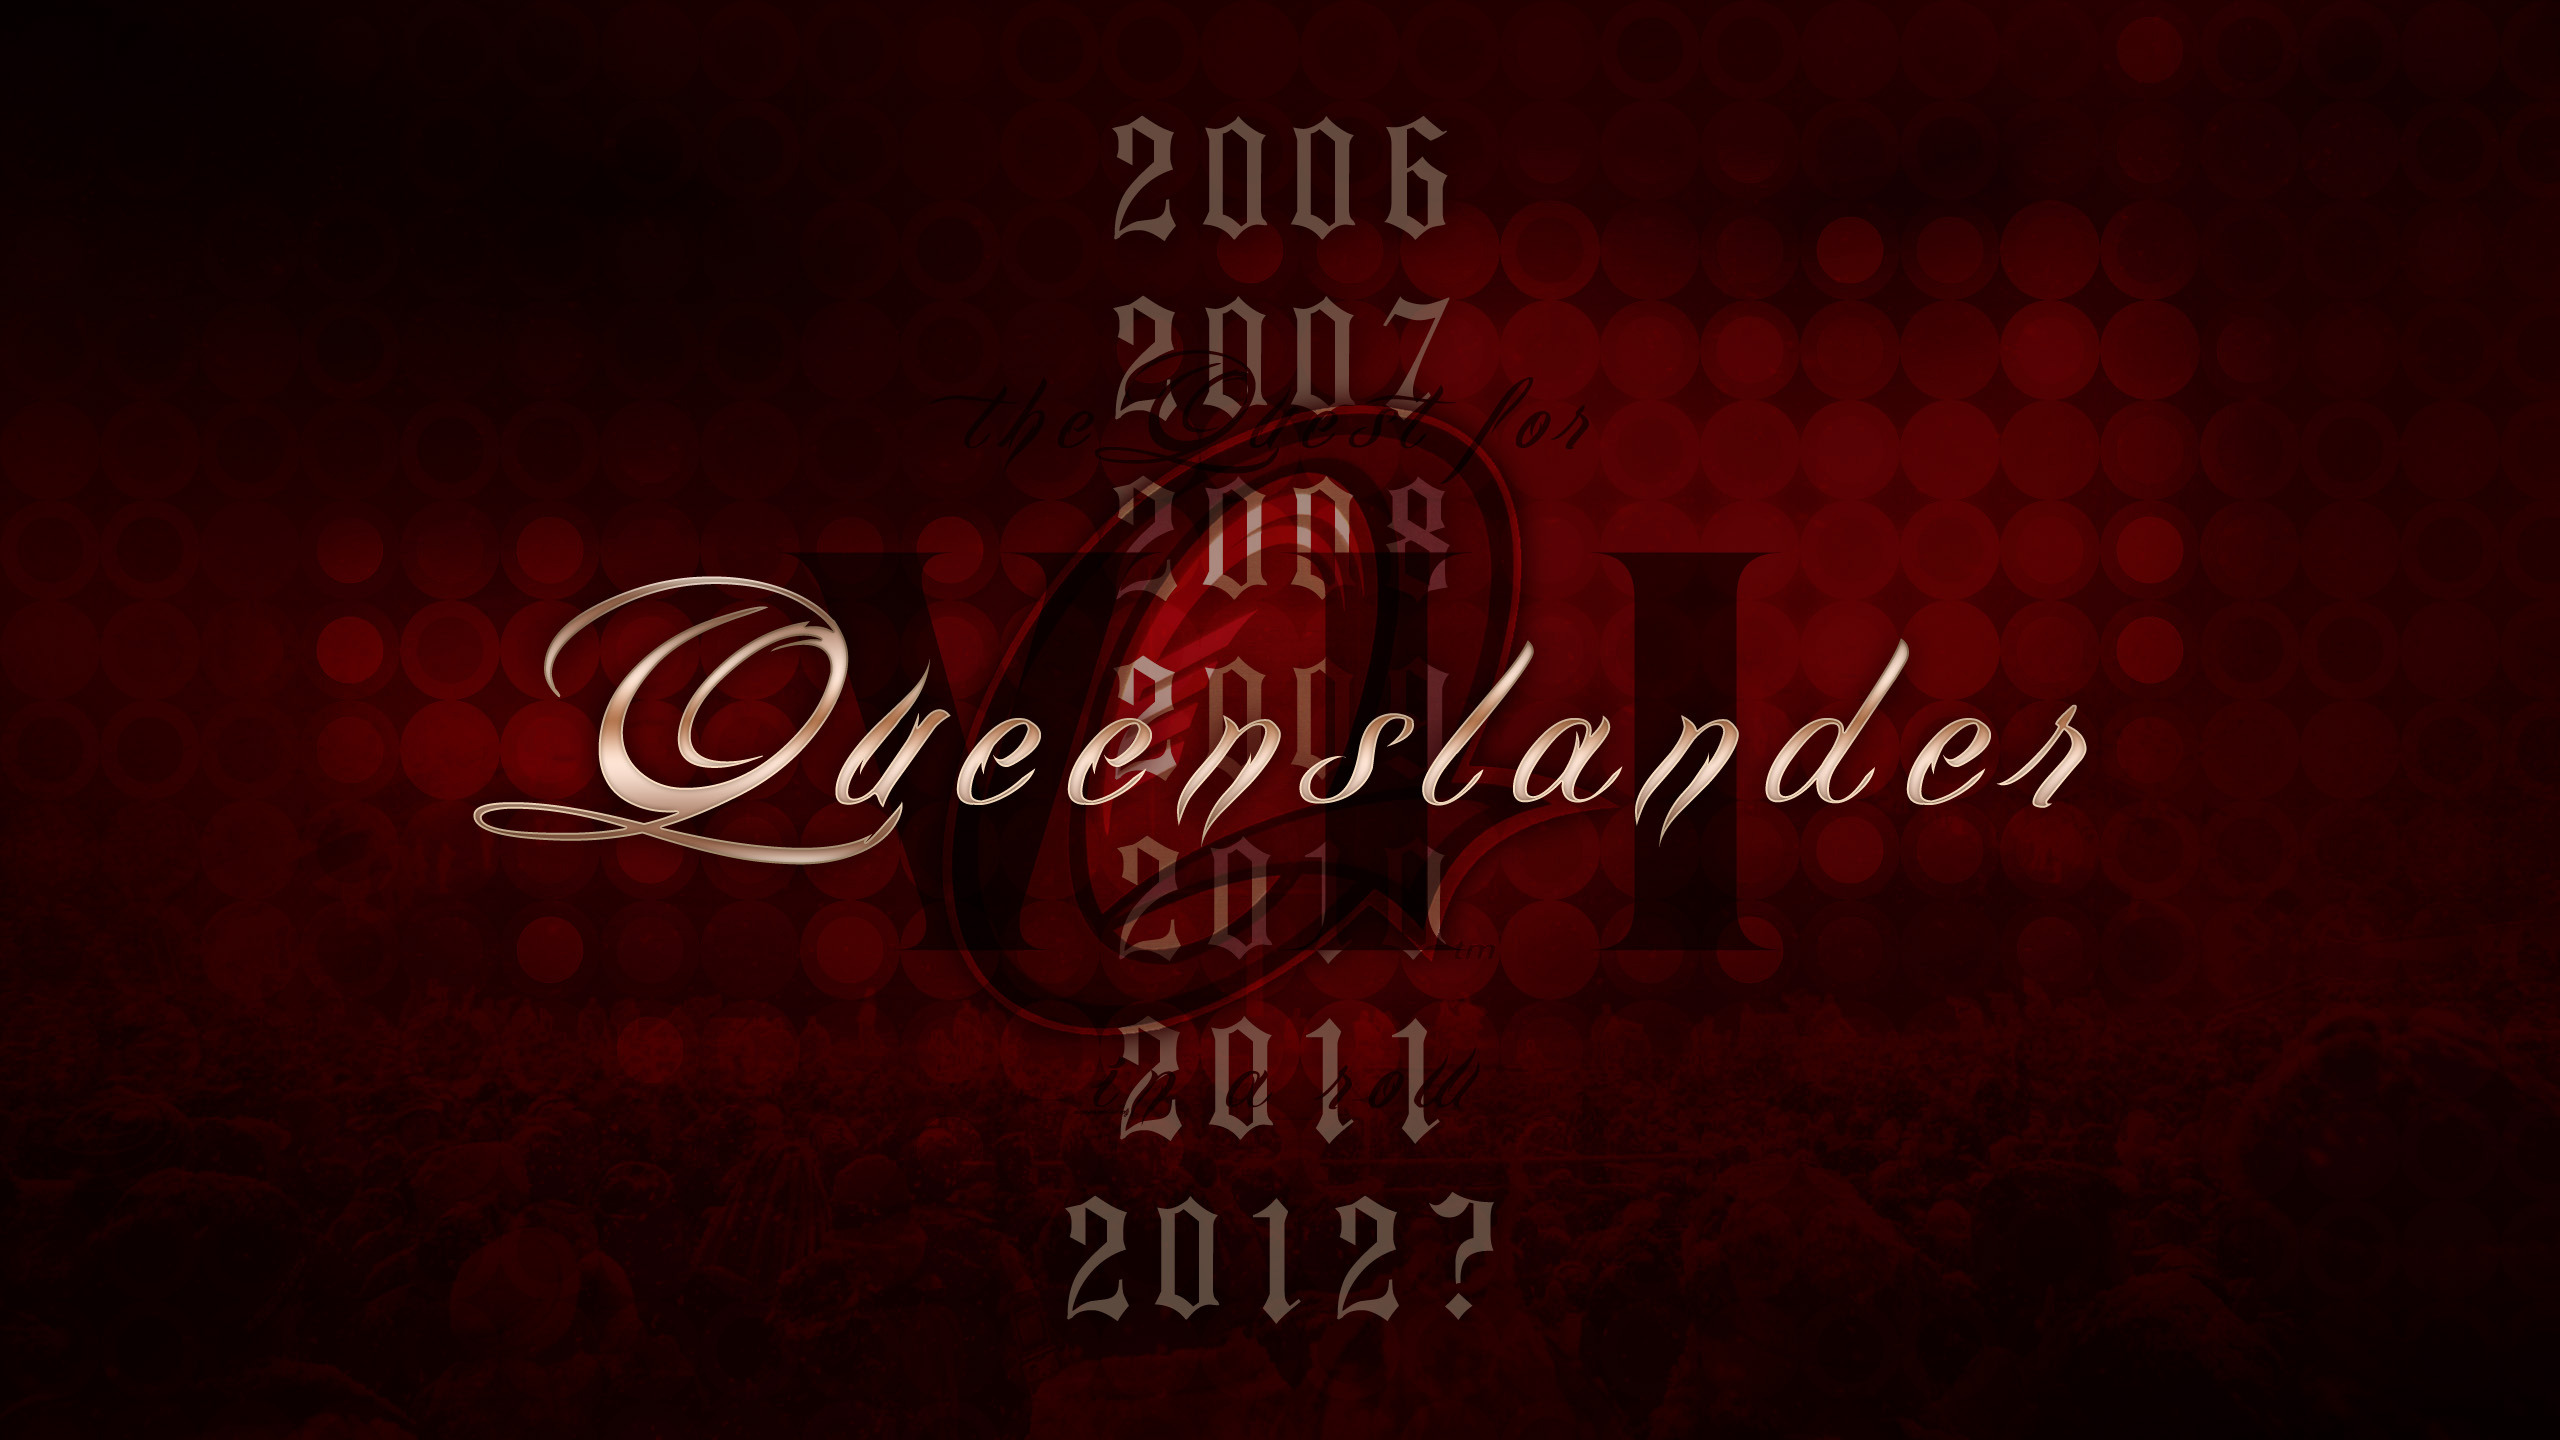 2012 Qld State Of Origin Wallpaper Pictures Images Photos 2560x1440